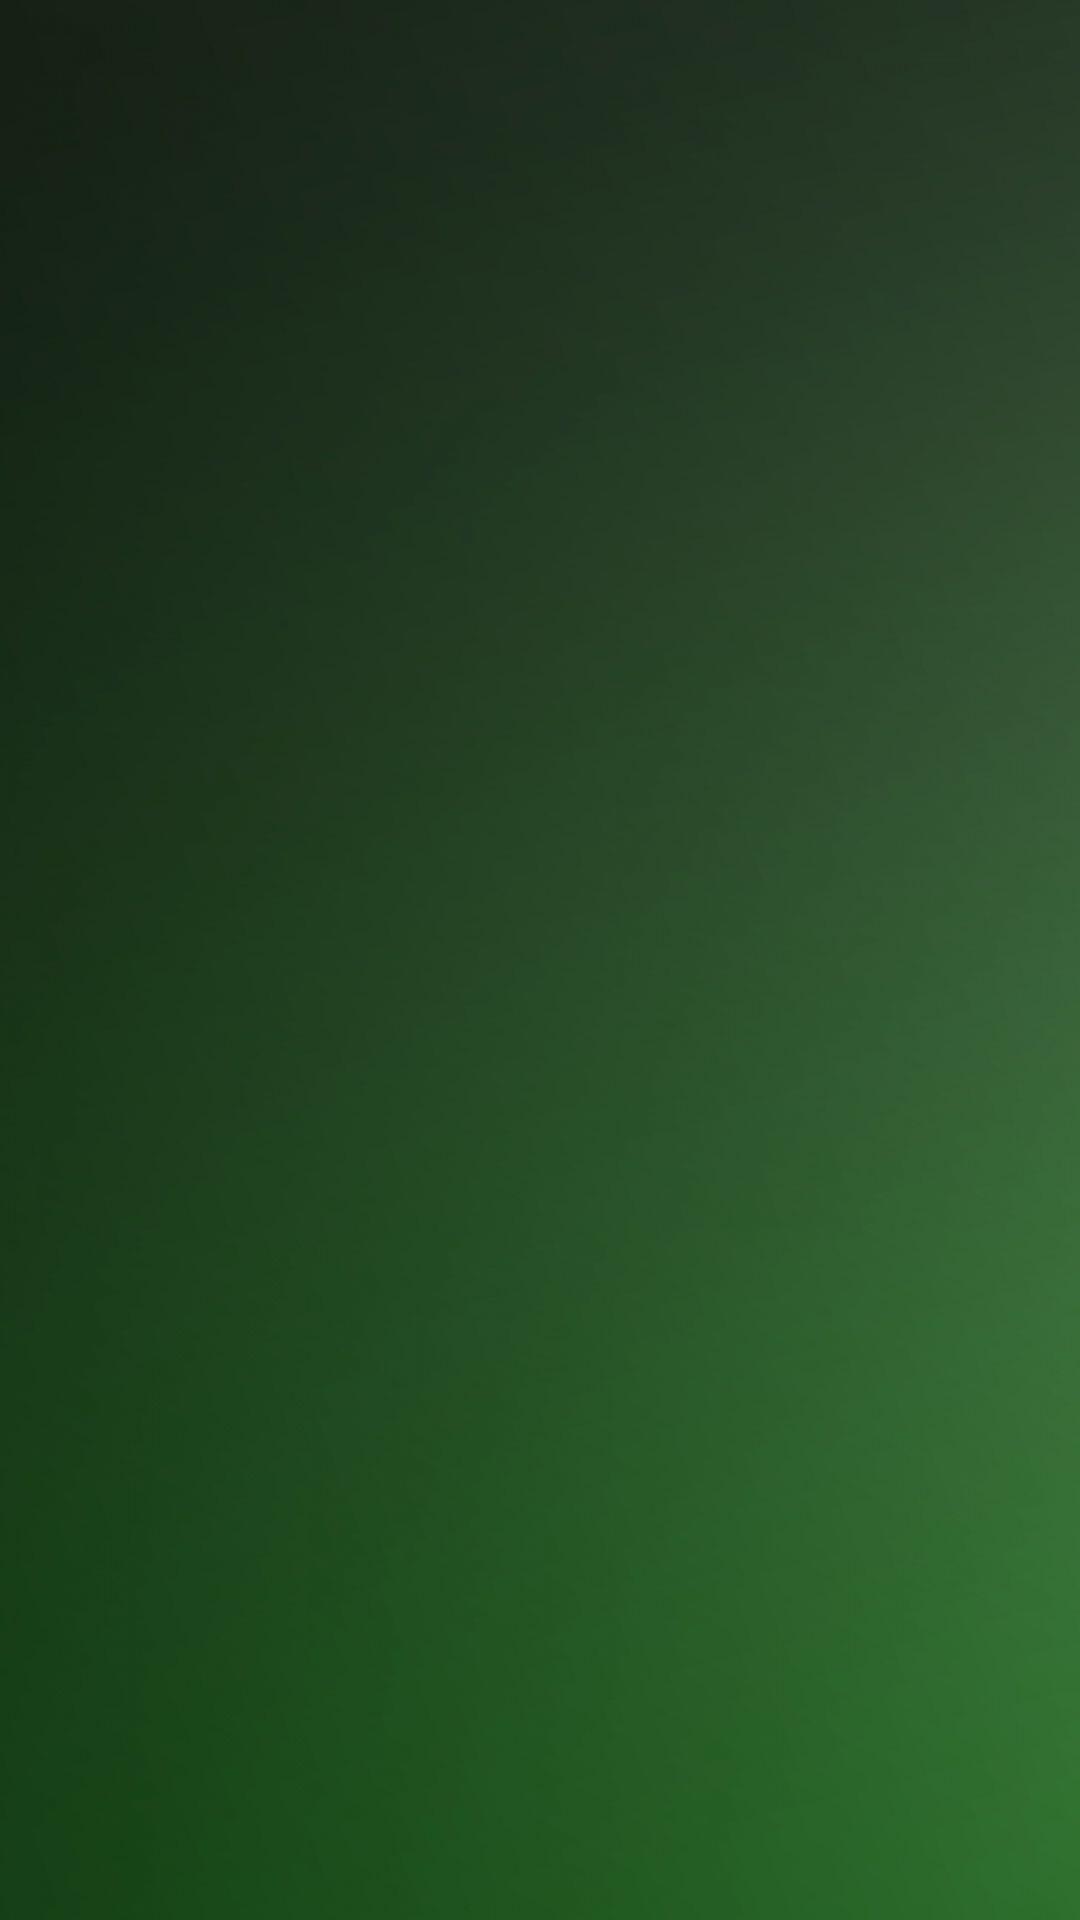 Green Color Wallpaper Hd For Mobile